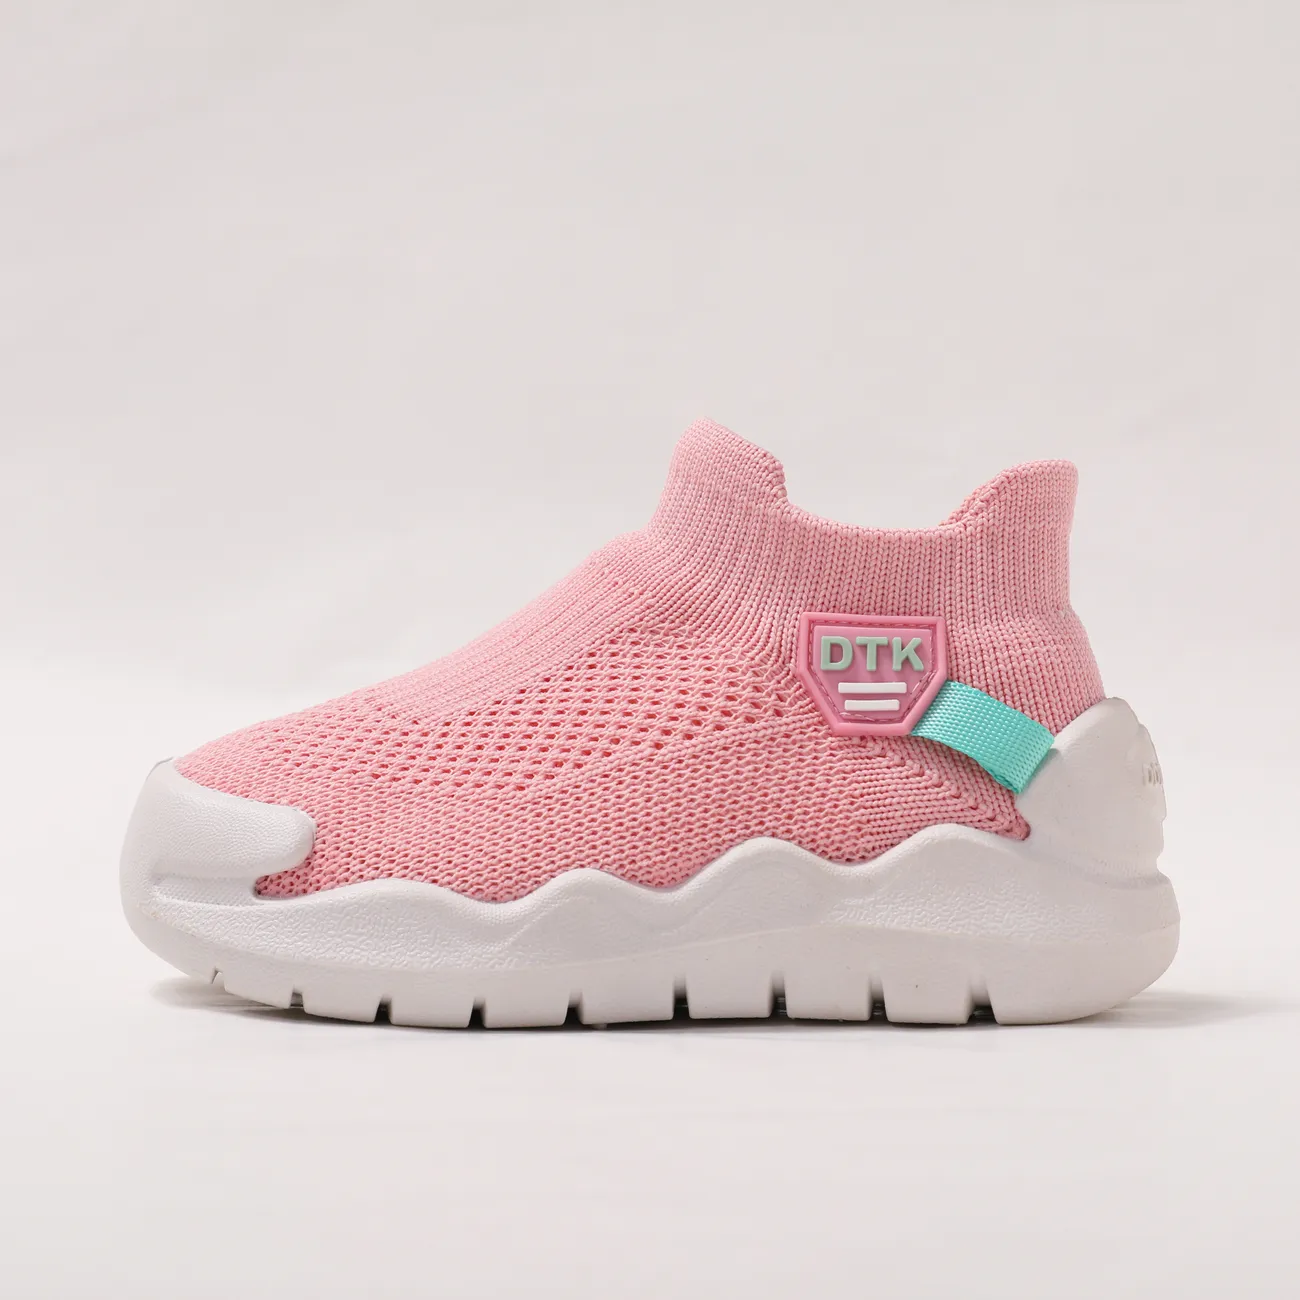 Toddler/Kid Sporty Style Mesh and Cotton Slip-on Sports Shoes  Pink big image 1